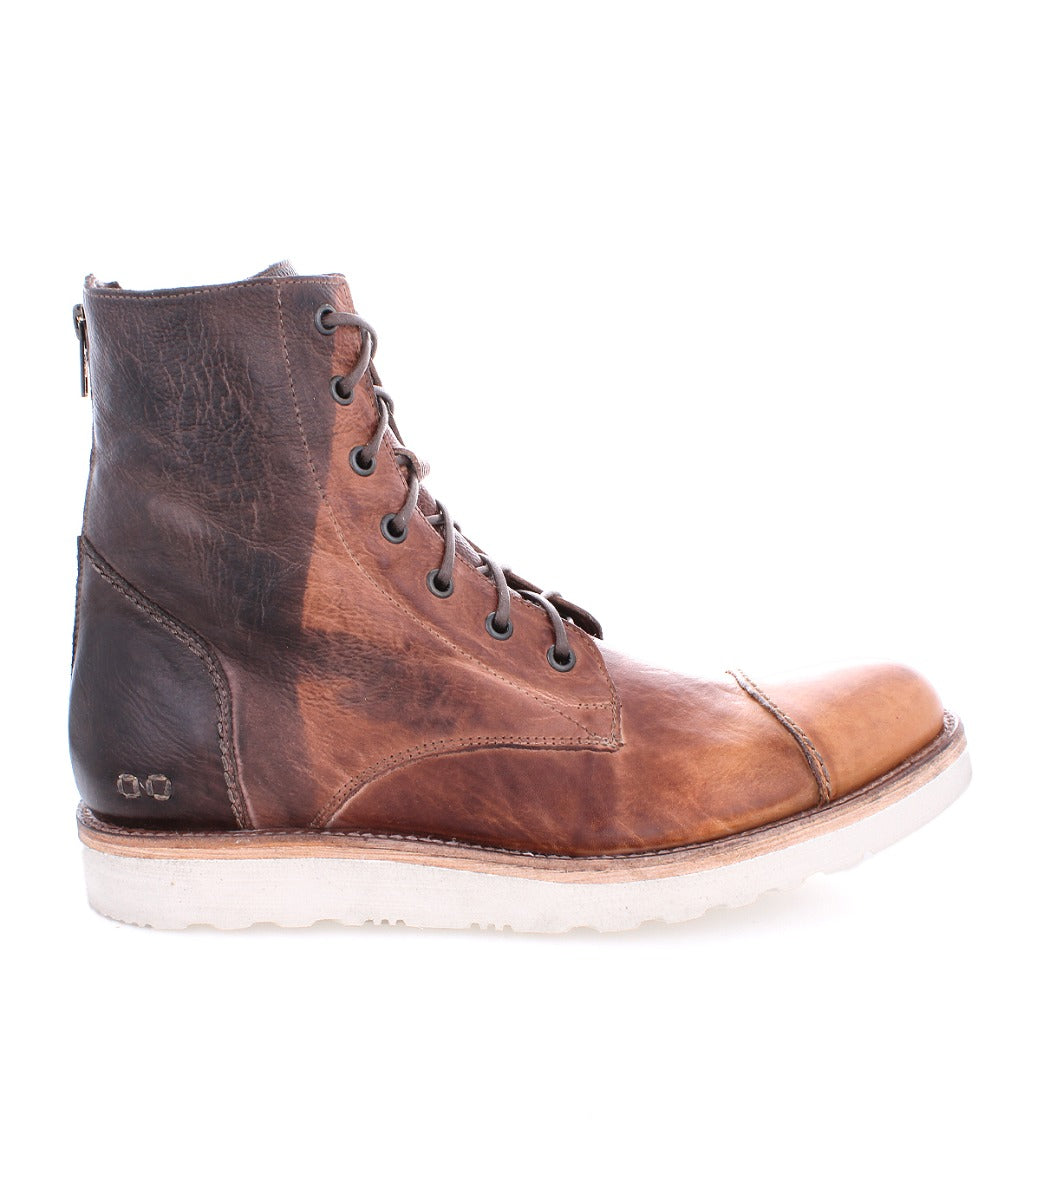 A single brown leather men's Protege Light Boot by Bed Stu with lace-up front and a light-colored sole, isolated on a white background.